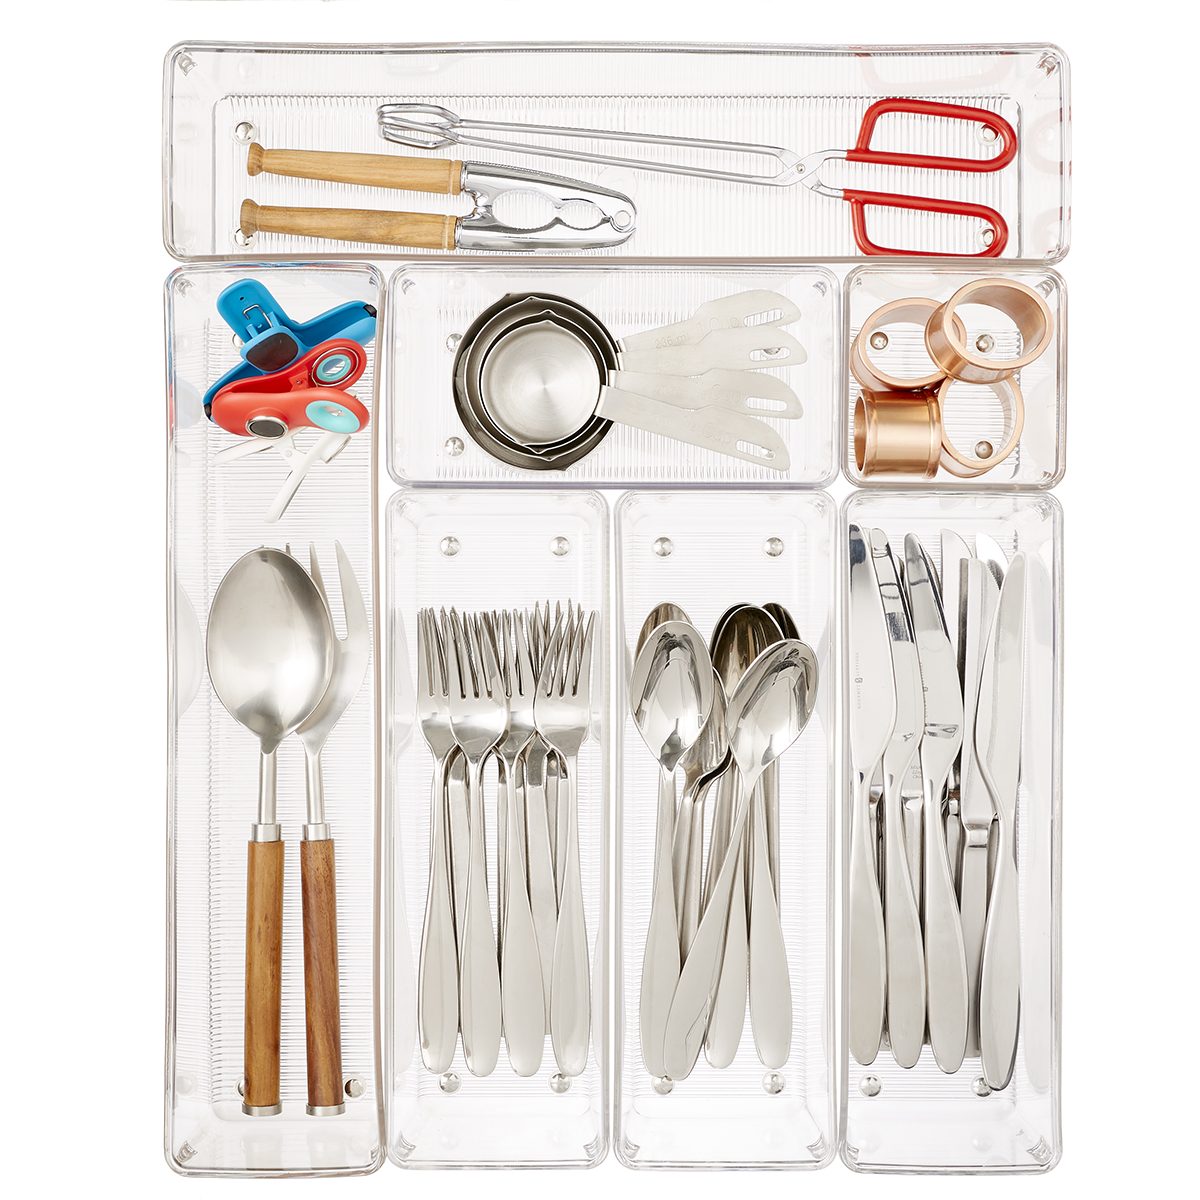 https://www.containerstore.com/catalogimages/370000/VIS-linus-deep-drawer-organizers-20x.jpg